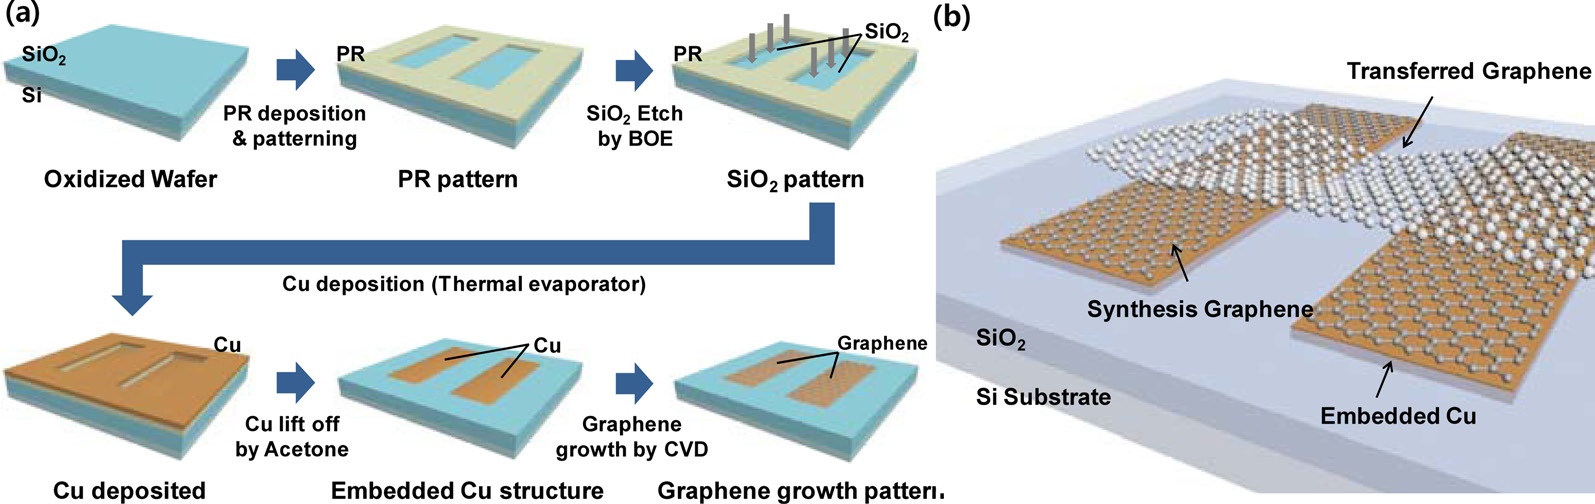 (a) The overall process of fabricating an embedded Cu electrode structure. (b) The structure to improve contact between the electrode and graphene
using chemical vapor deposition (CVD) grown graphene as an intermediate layer.